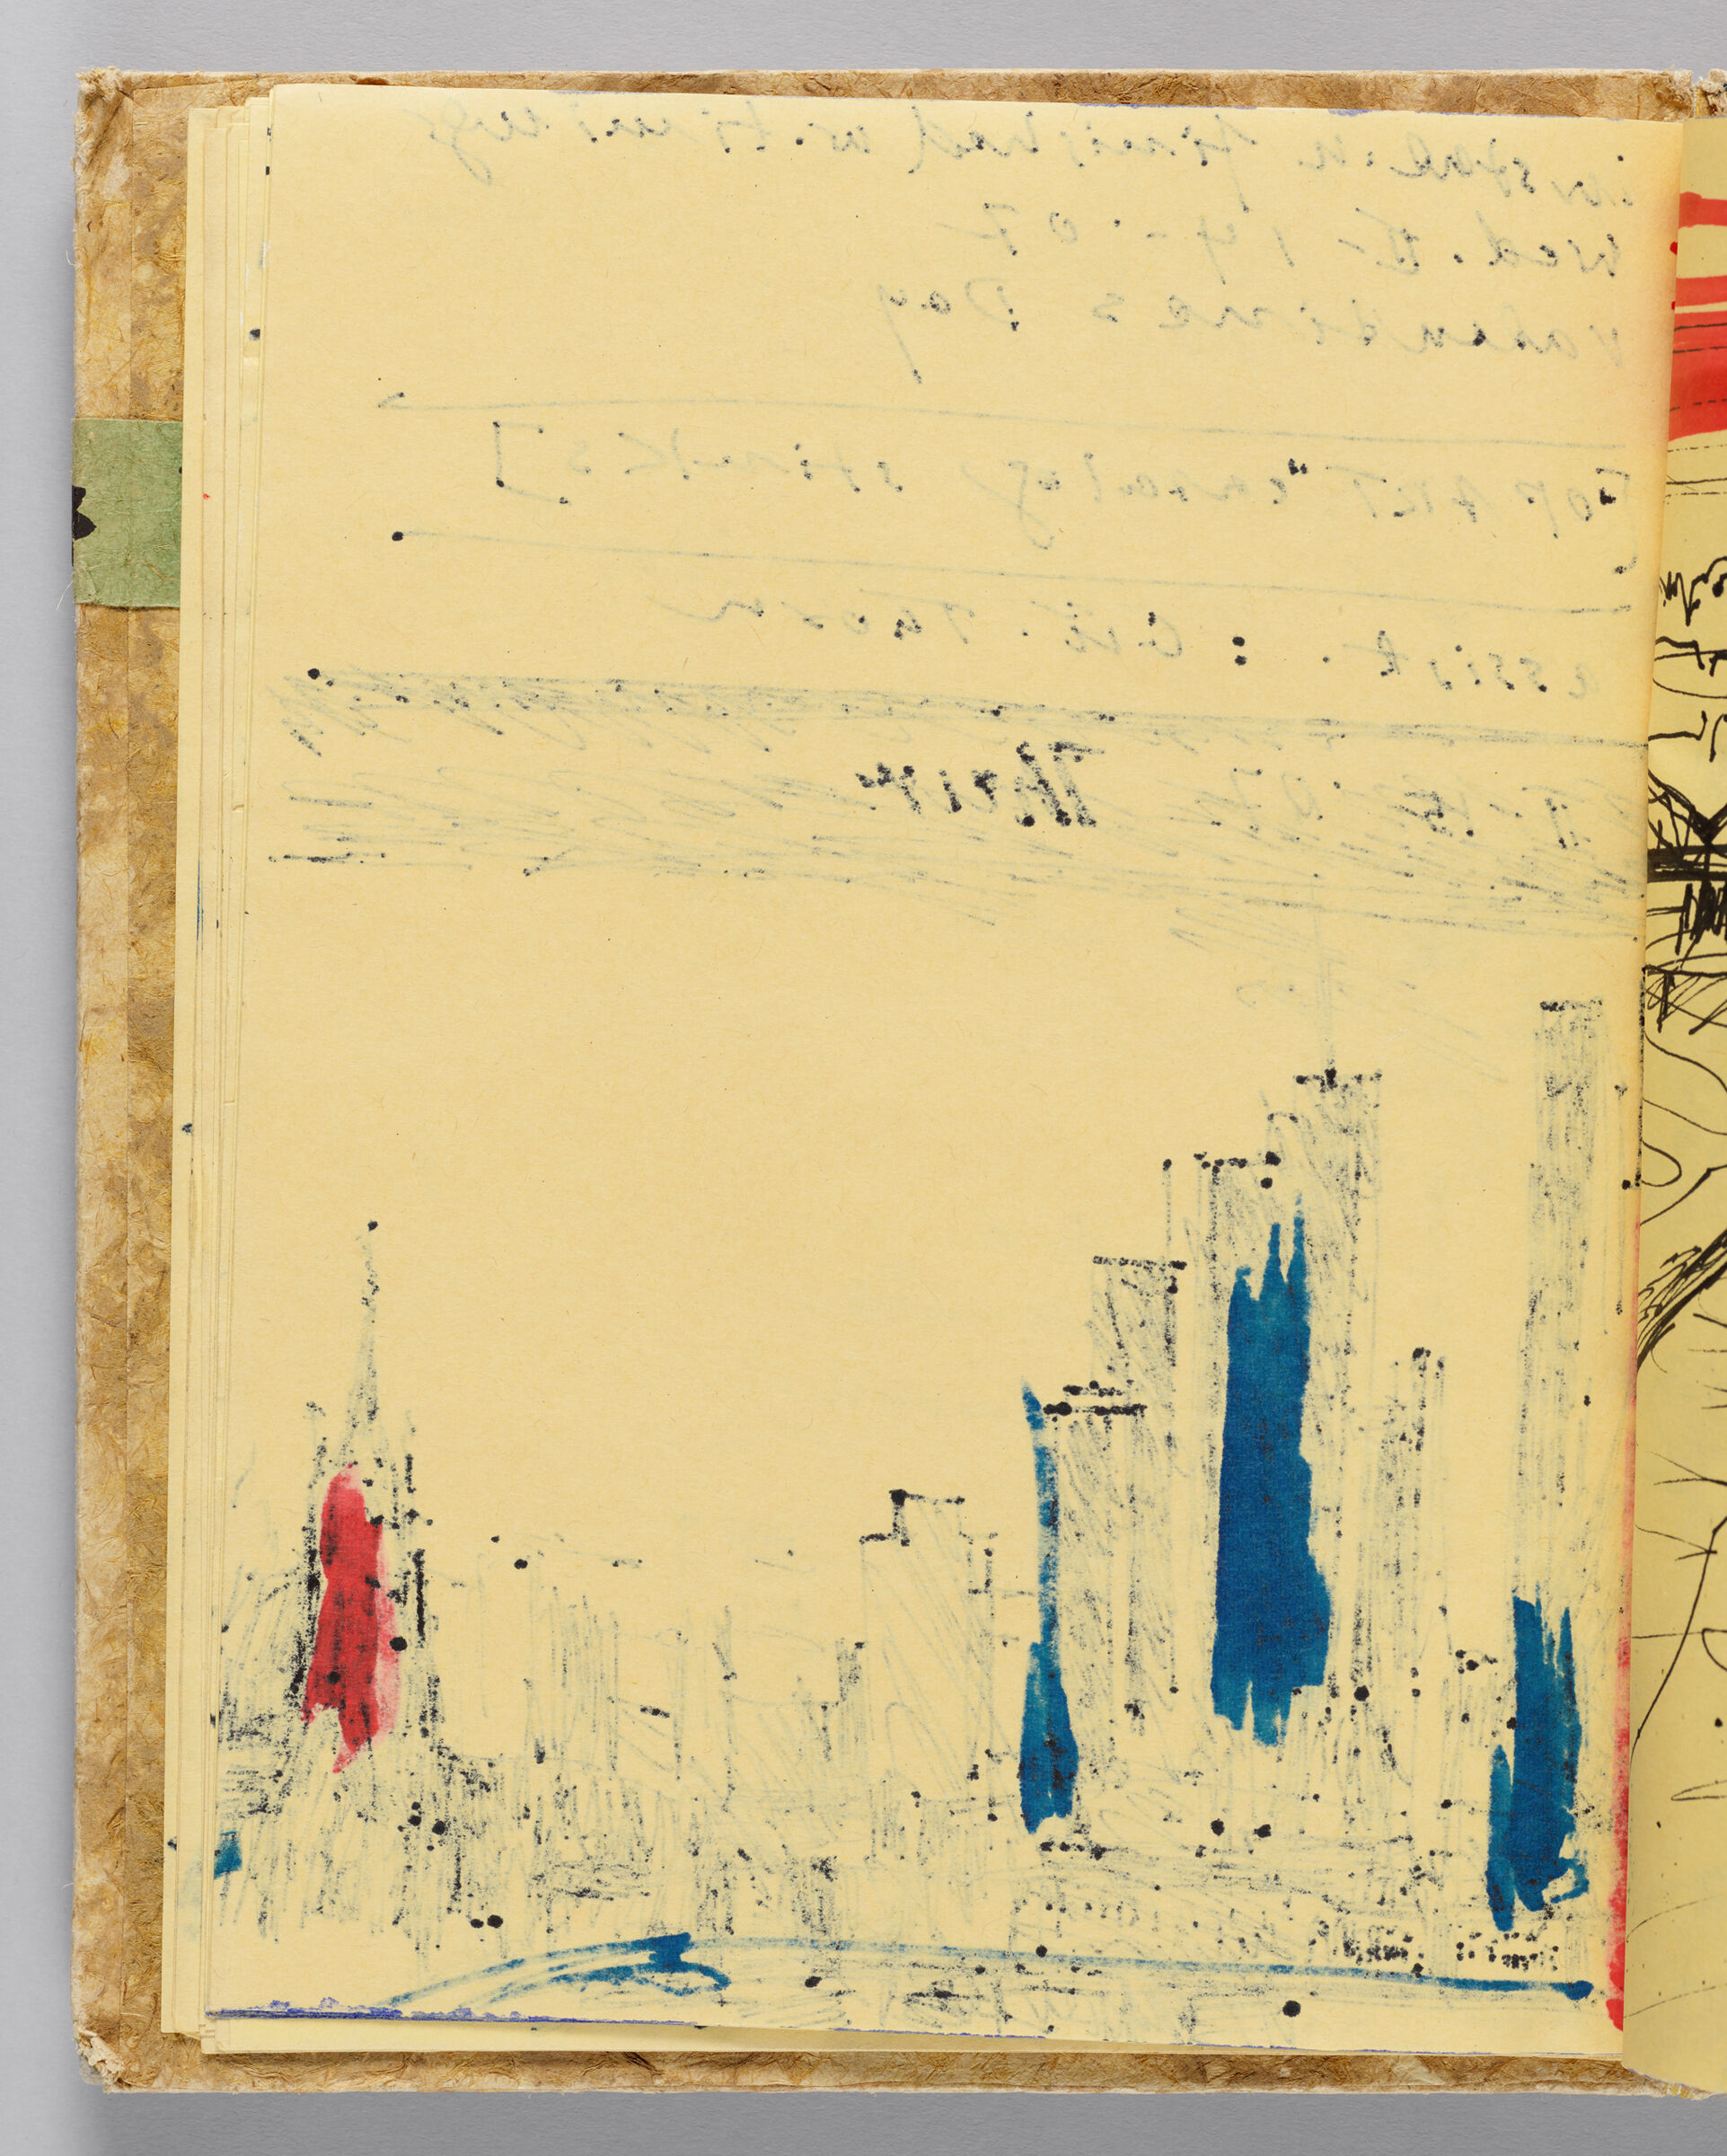 Untitled (Bleed-Through Of Previous Page, Left Page); Untitled (Bridge [Over Main River In Frankfurt], Right Page)